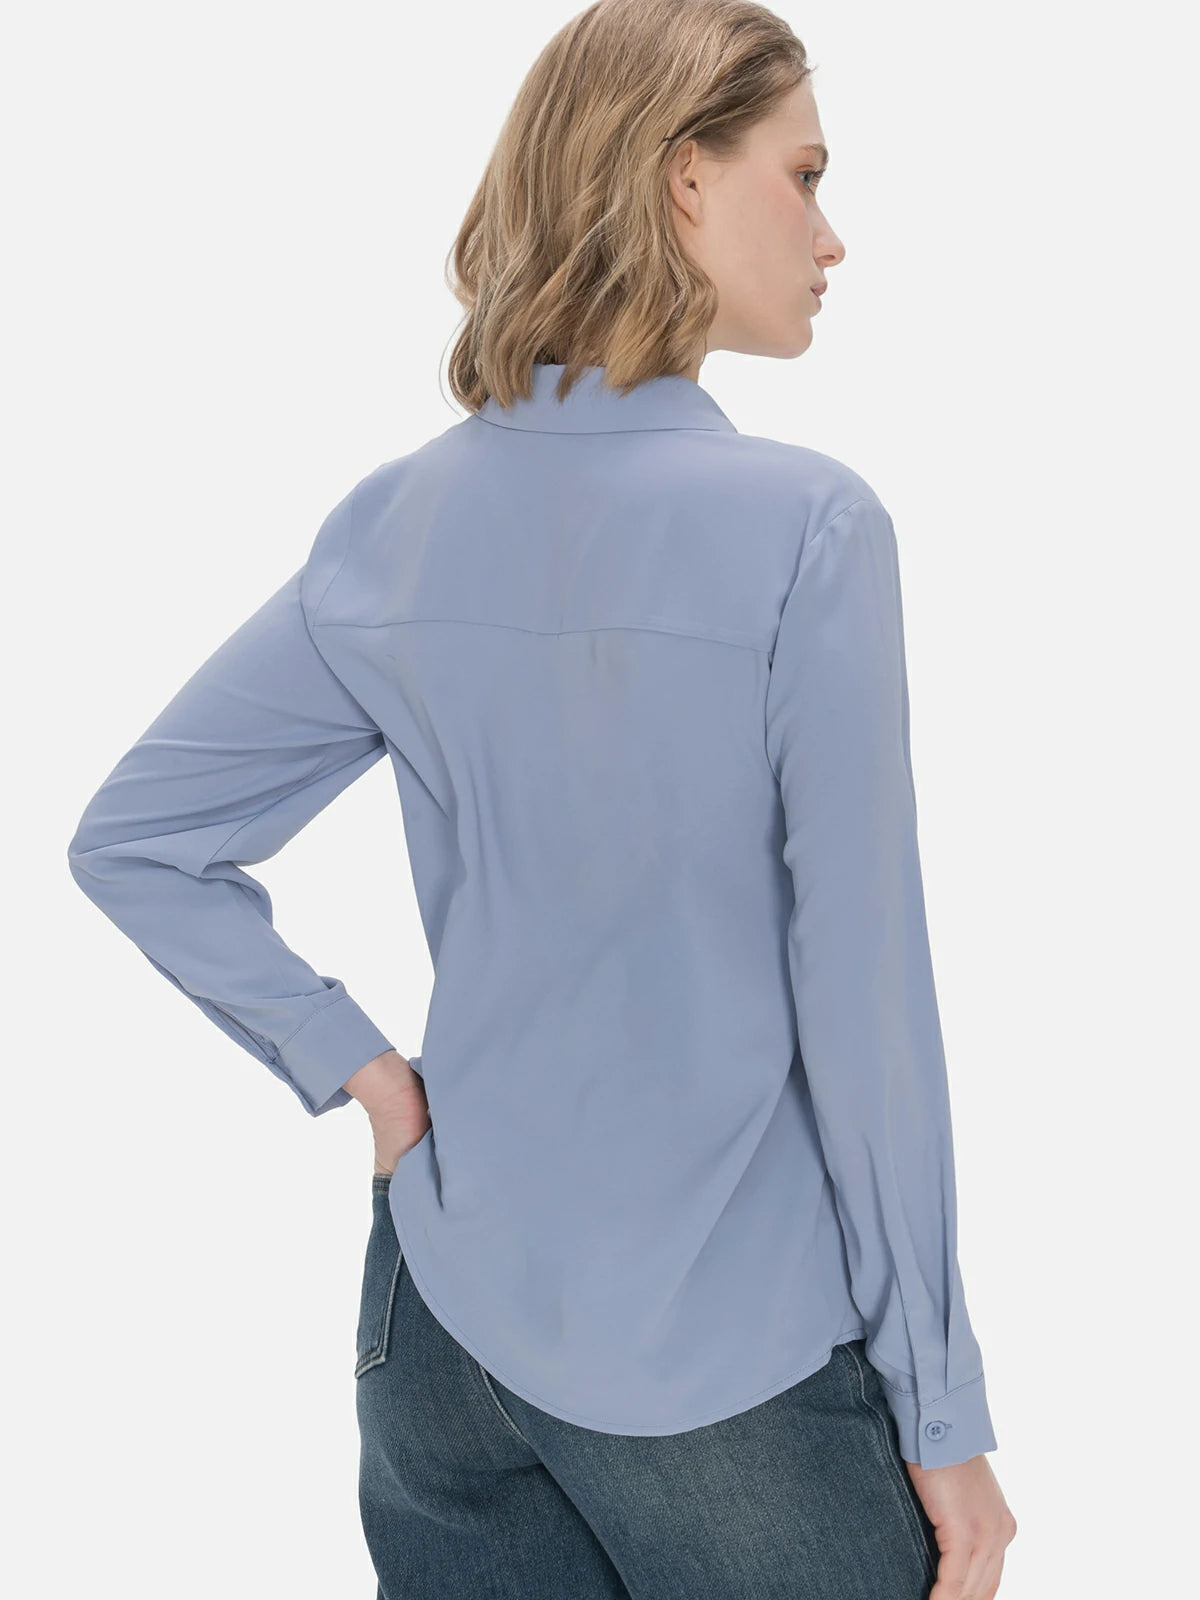 Delicate embellishments on a blue chiffon shirt with a turnover collar, creating an elegant and refined look suitable for both classic and casual outfits.